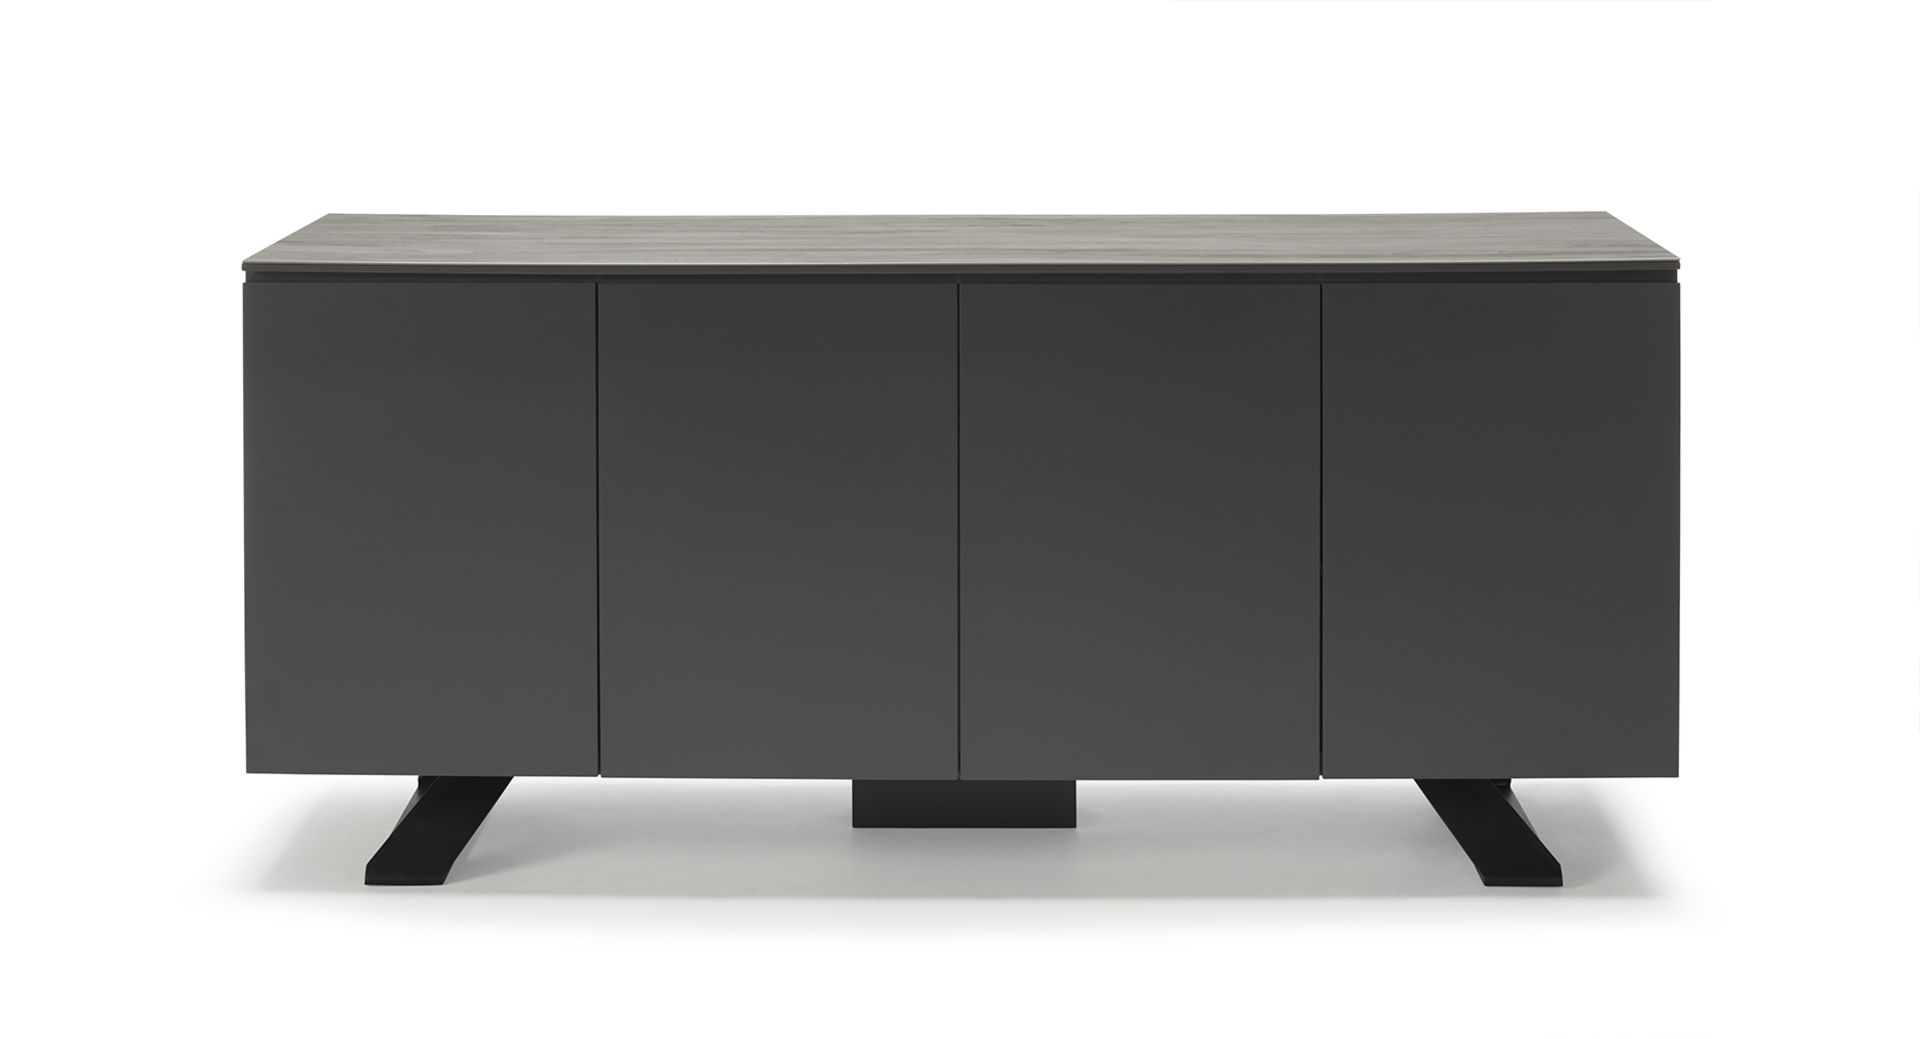 Spartan Sideboard by Kesterport The Spartan Four Door Sideboard provides is striking as a stand - Image 8 of 8